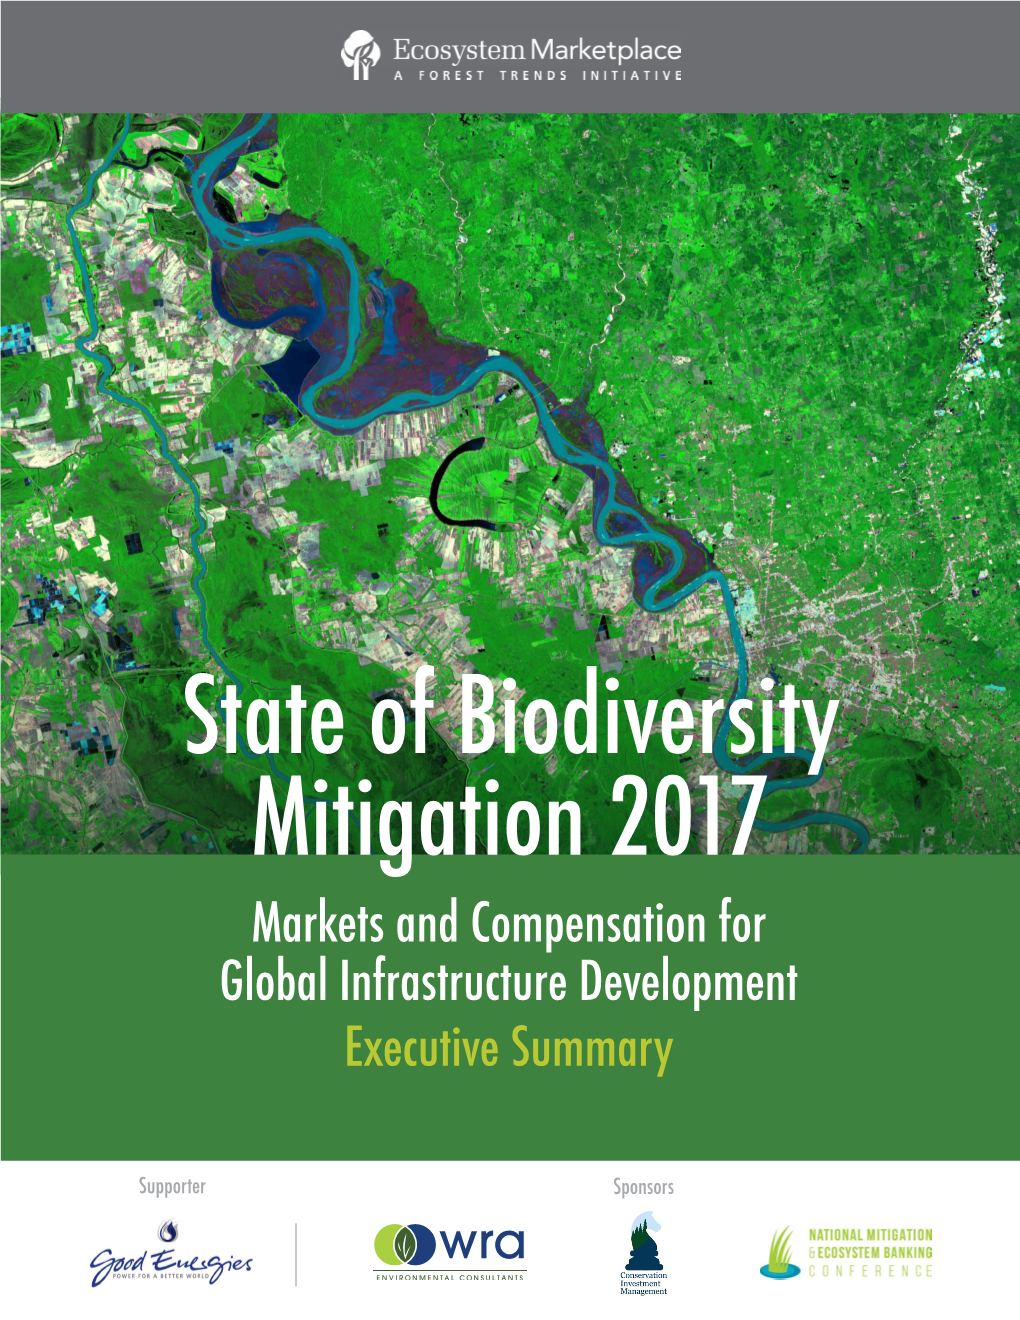 State of Biodiversity Mitigation 2017 Markets and Compensation for Global Infrastructure Development Executive Summary